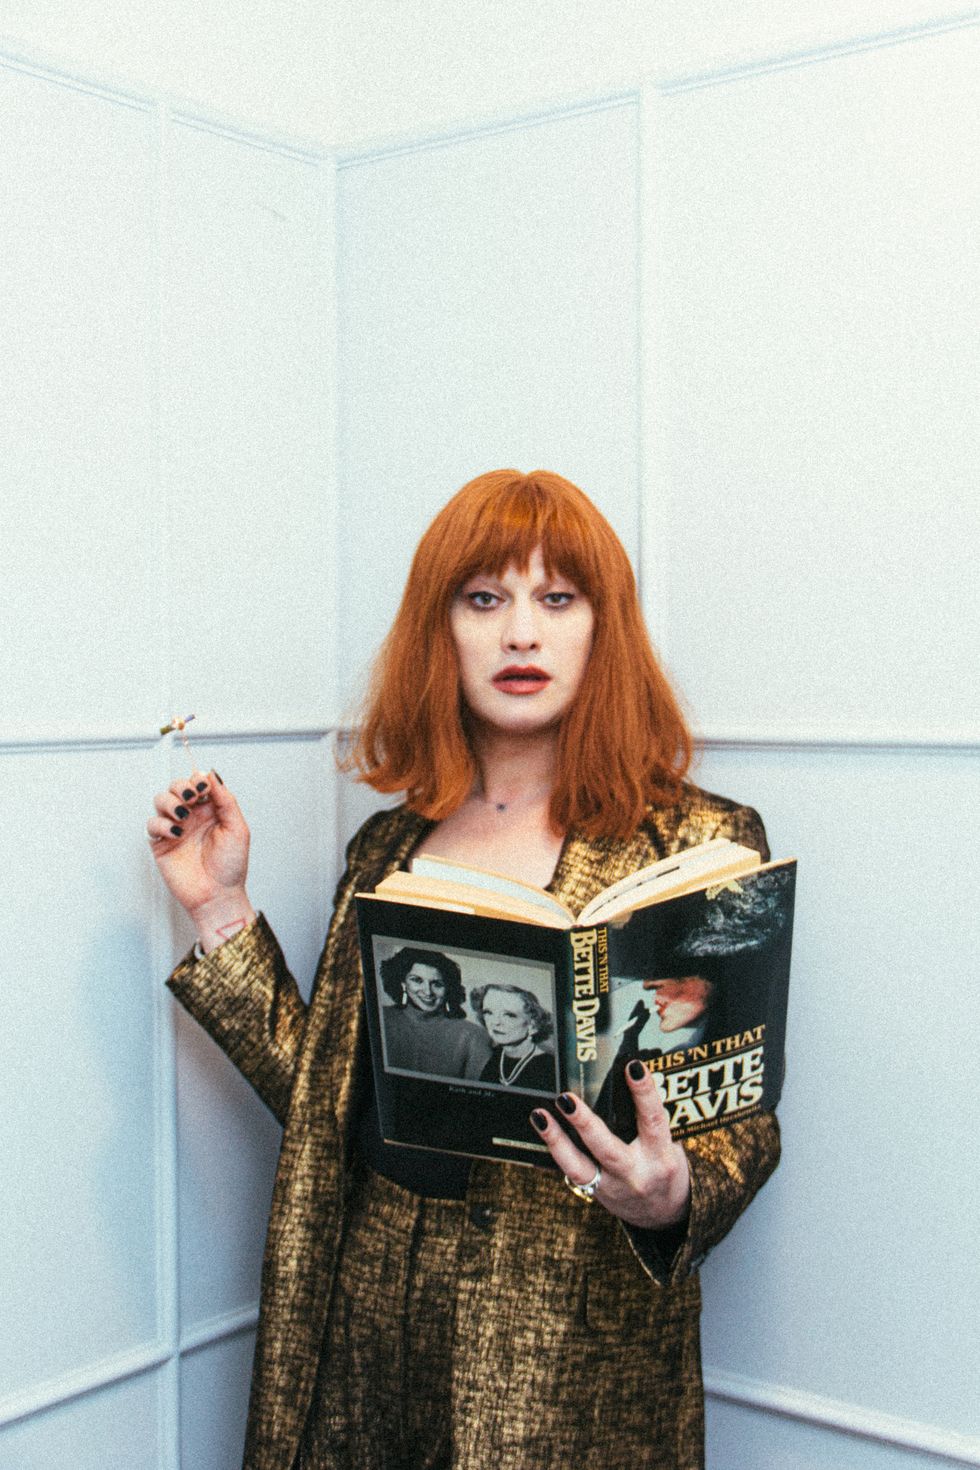 jinkx monsoon posing in gold with a bette davis book